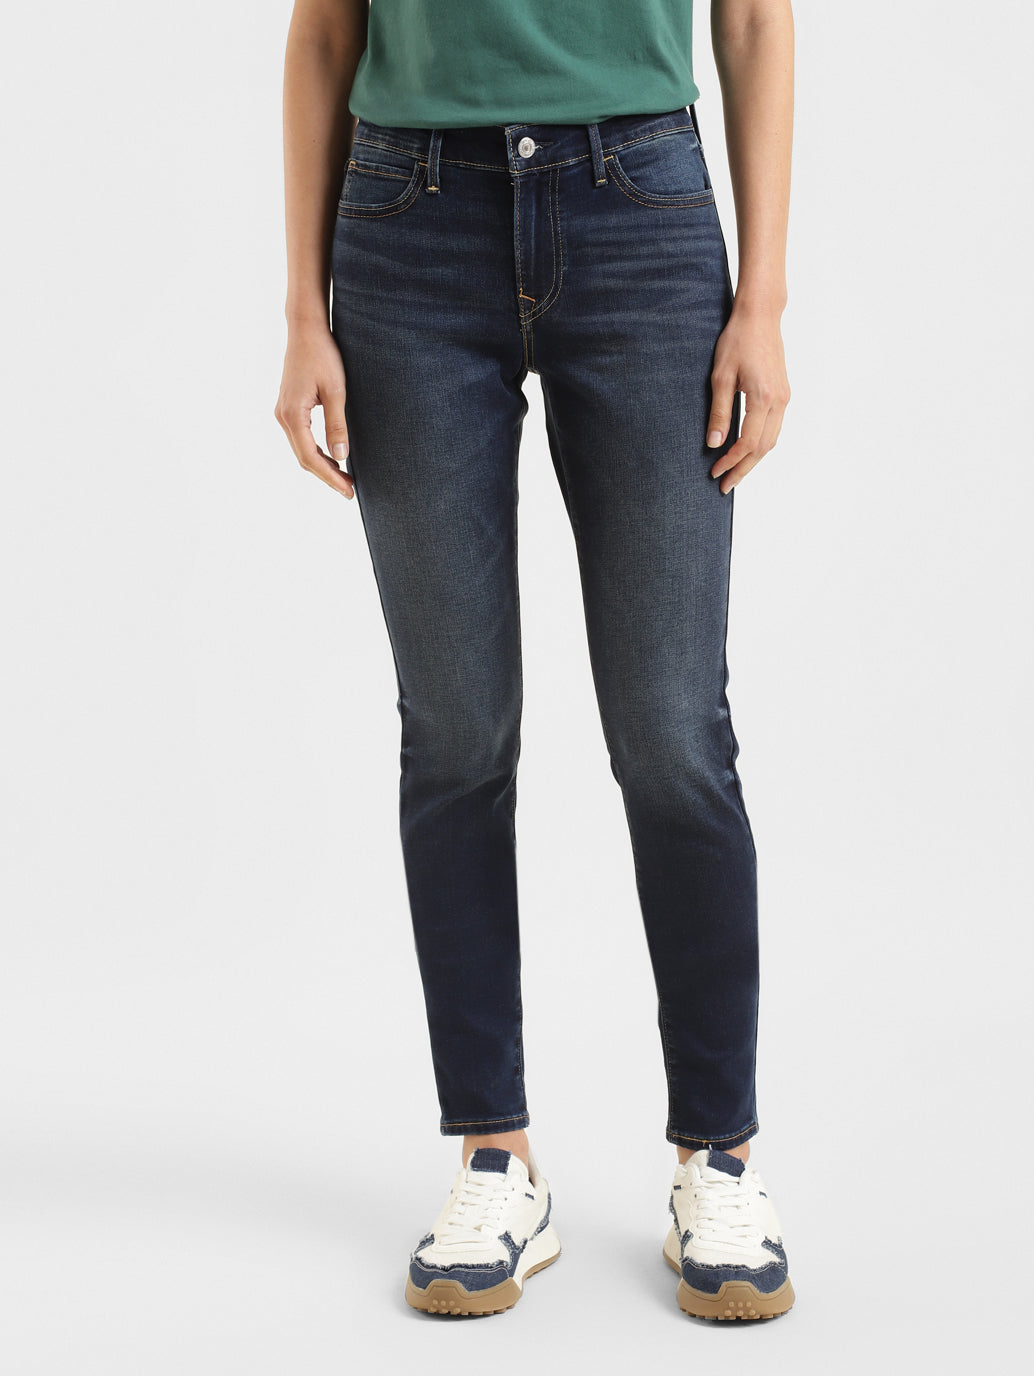 Shop Super Skinny Jeans for Women Online | Levi's India – Page 2 ...